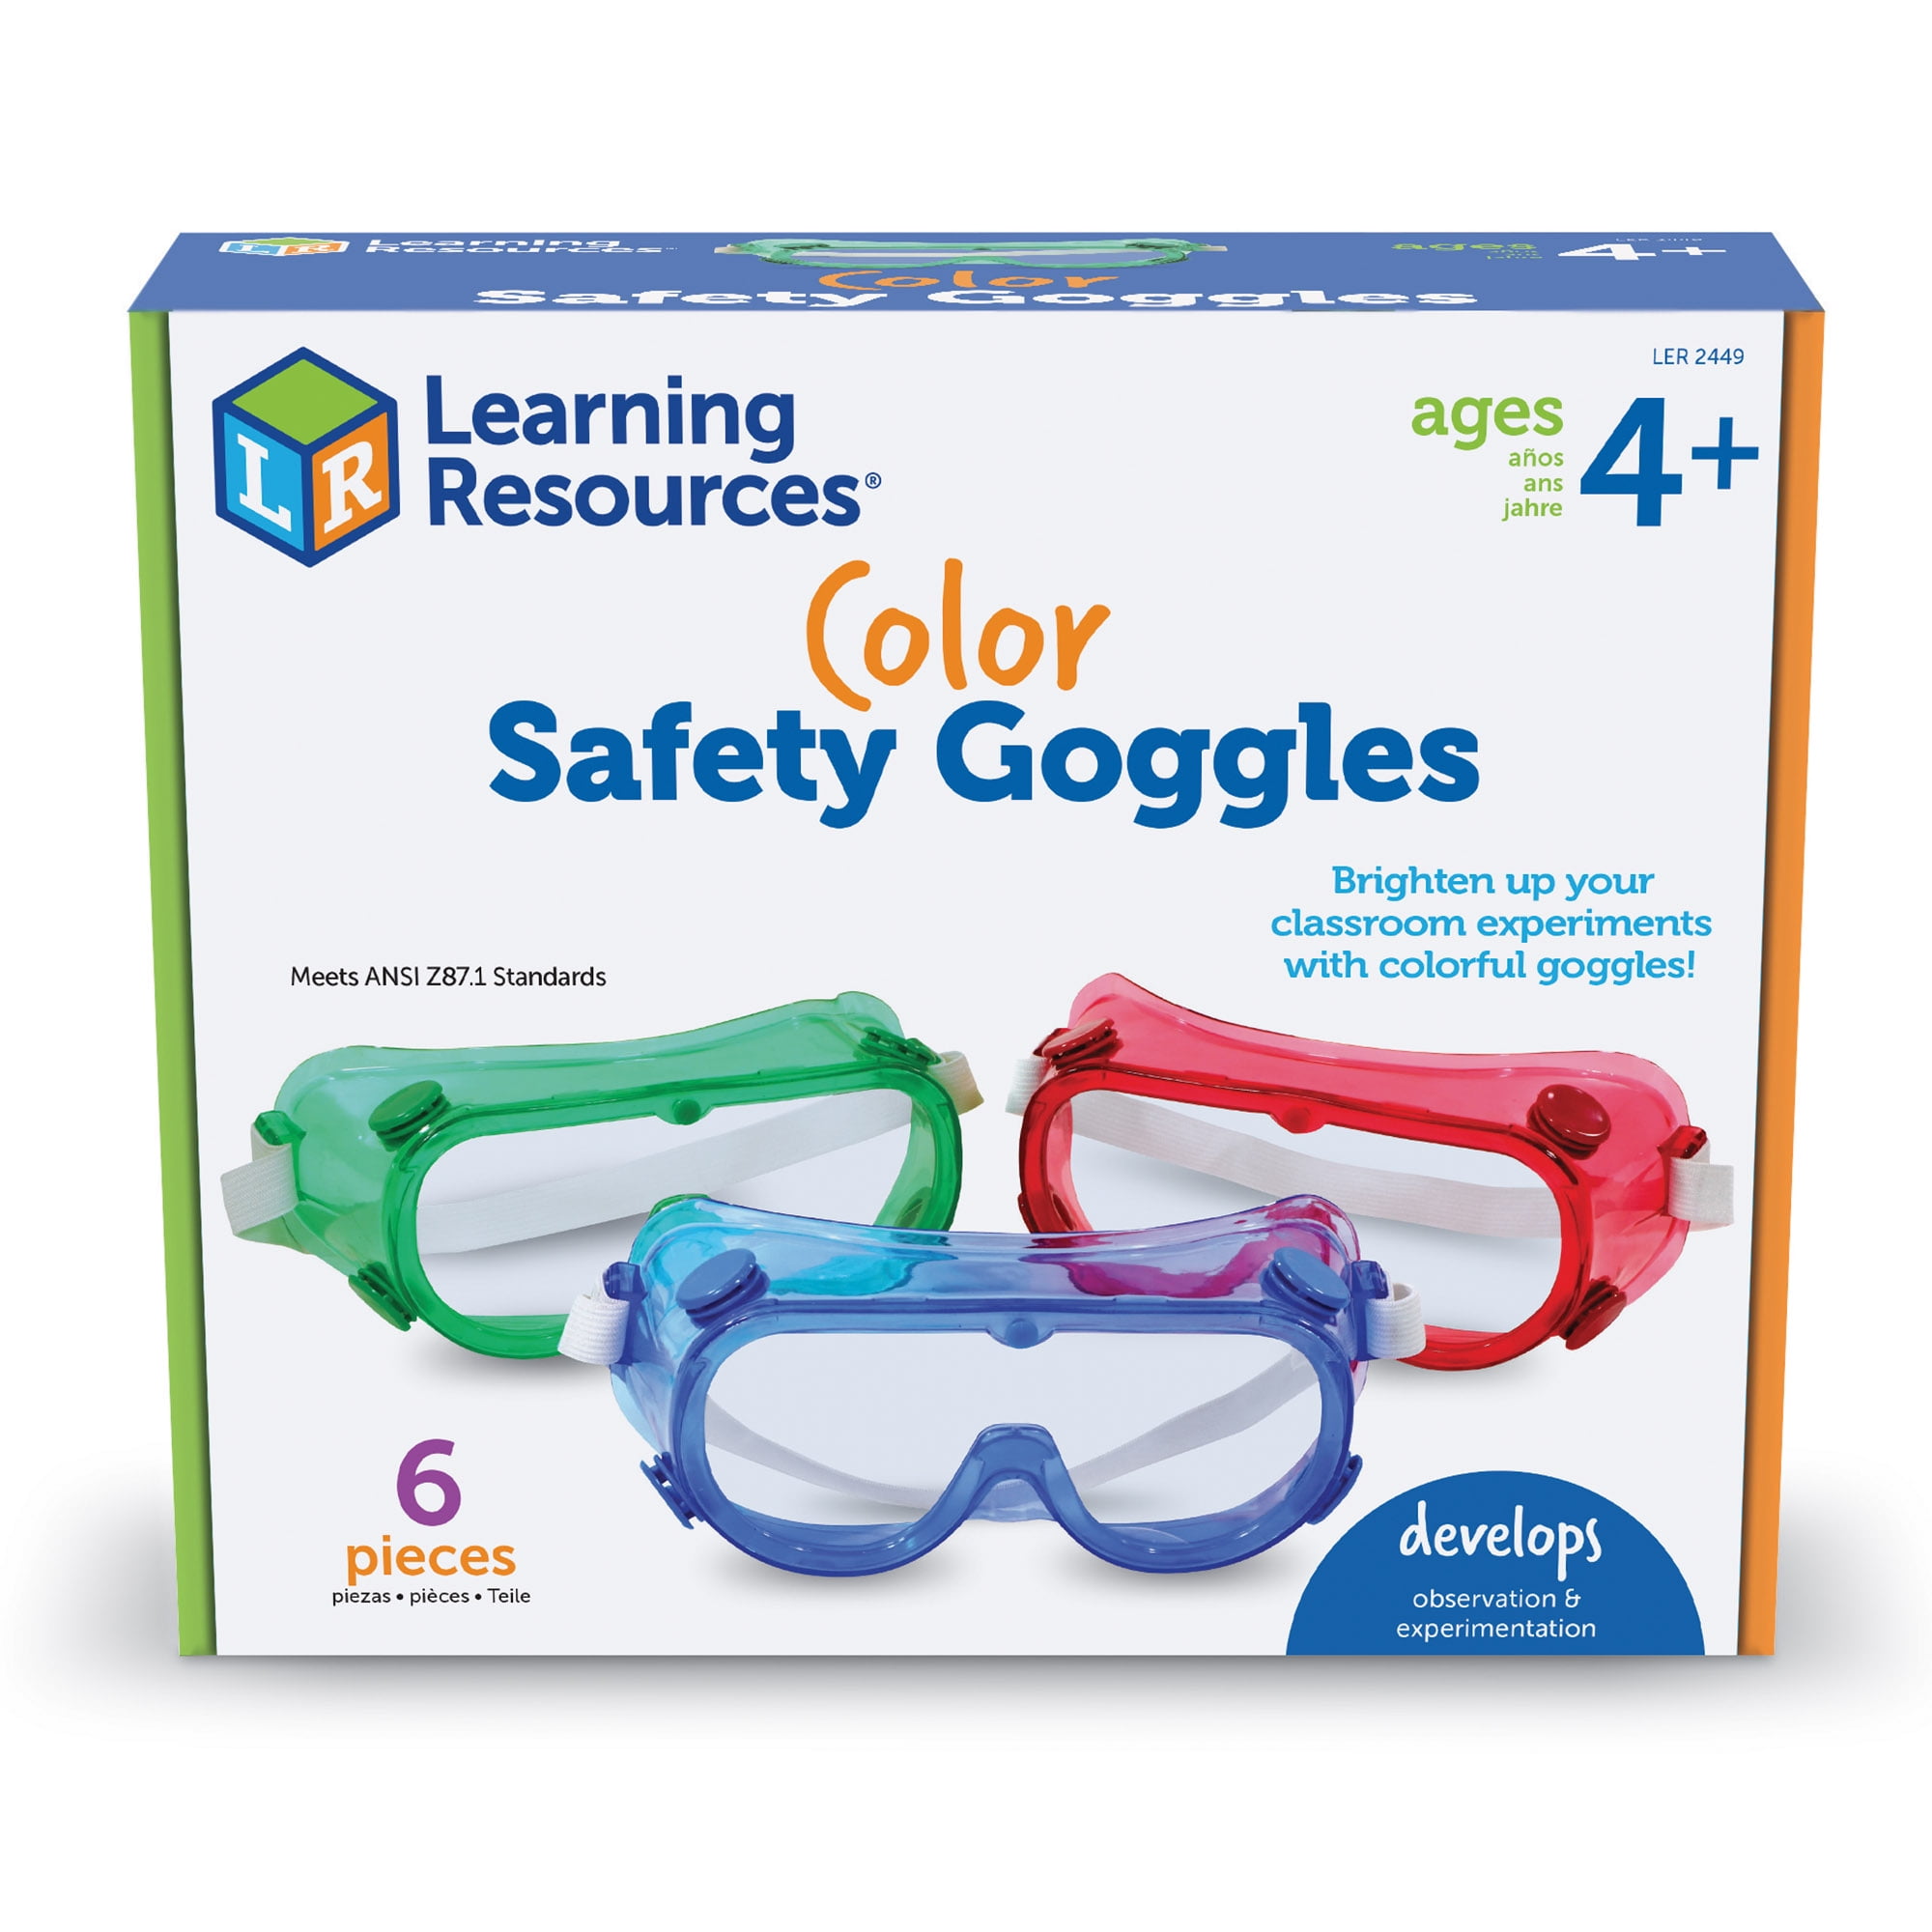 6/12x Safety Protection Glasses Goggles Eyewear Kids Outdoor Game